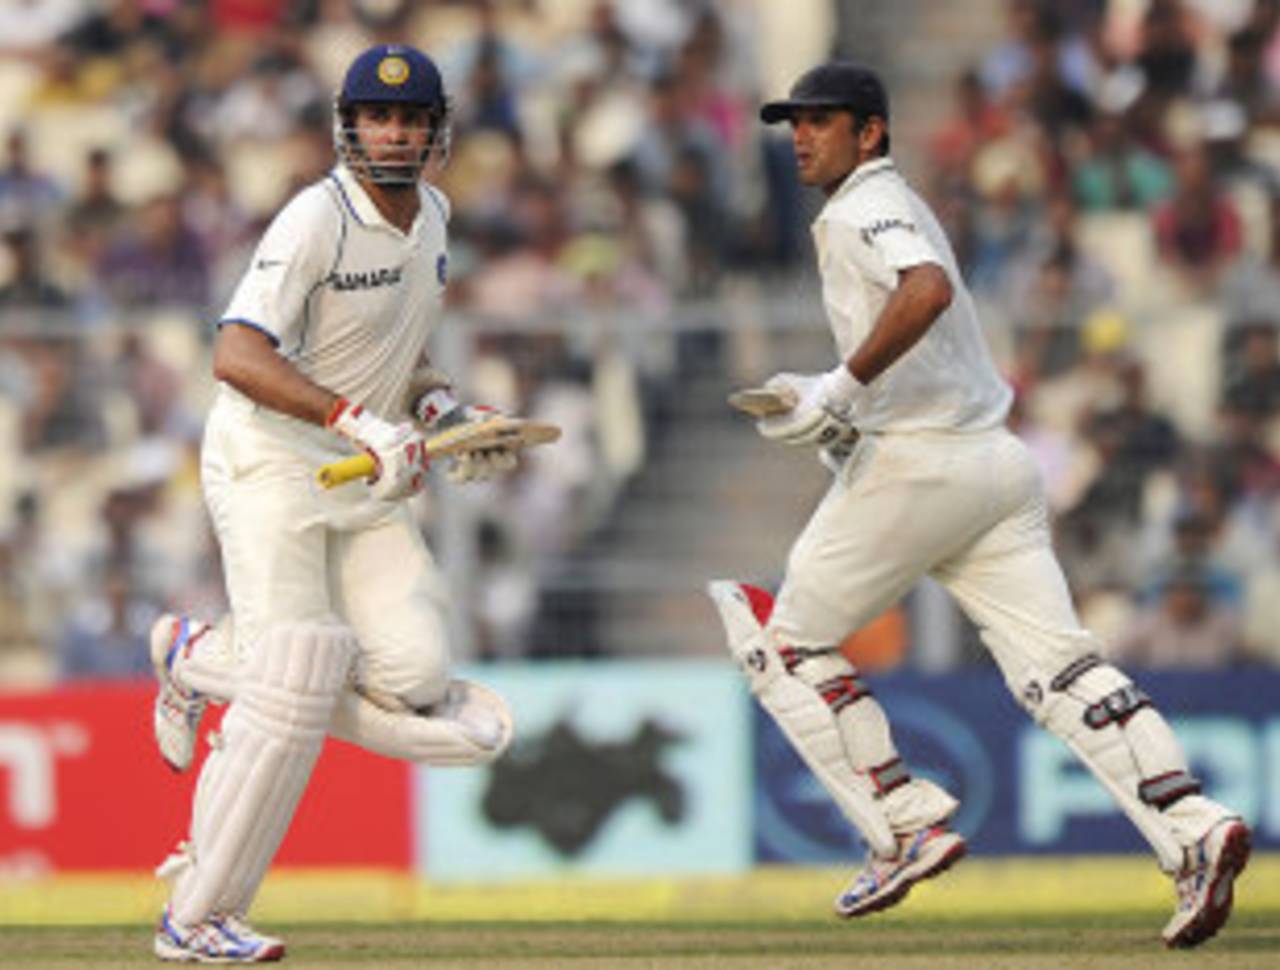 Rahul Dravid and VVS Laxman added 140 for the fourth wicket, India v West Indies, 2nd Test, Kolkata, 1st day, November 14, 2011